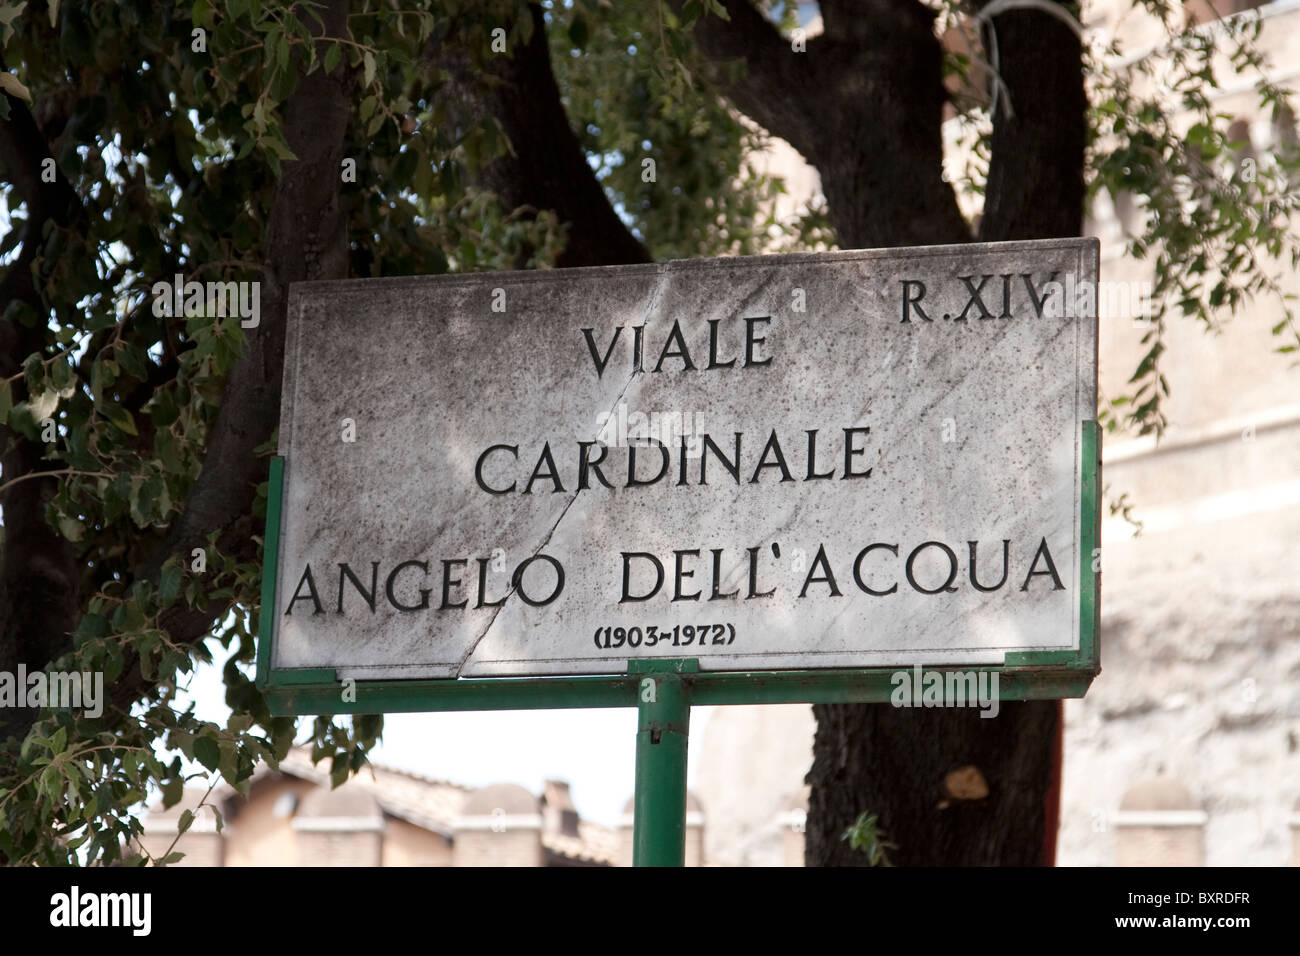 Viale Cardinale Angelo Dell'Acqua alongside the Castel Sant'Angelo in Rome, Italy Stock Photo